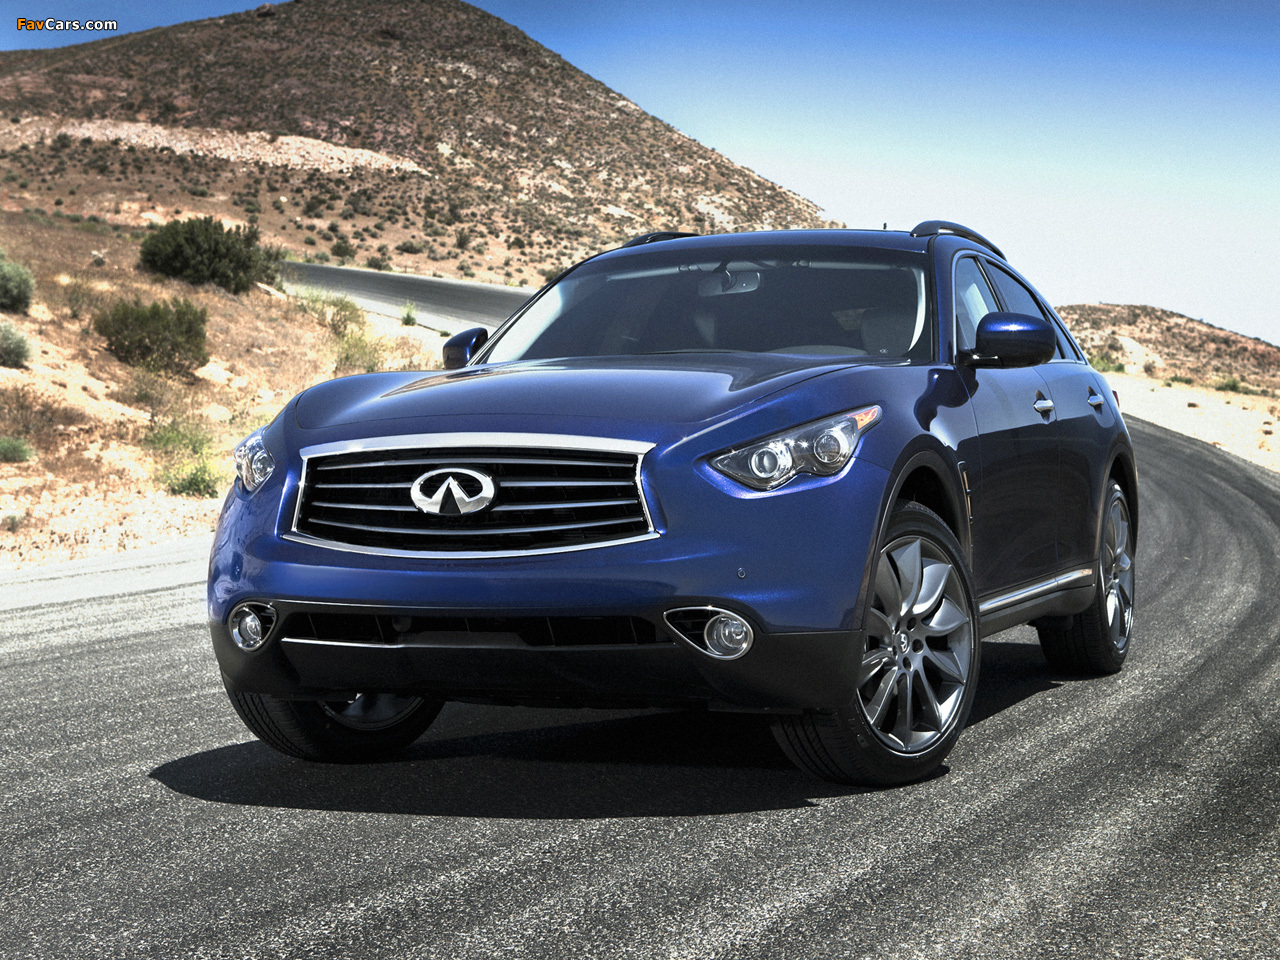 Infiniti FX35 Limited Edition (S51) 2011 pictures (1280 x 960)